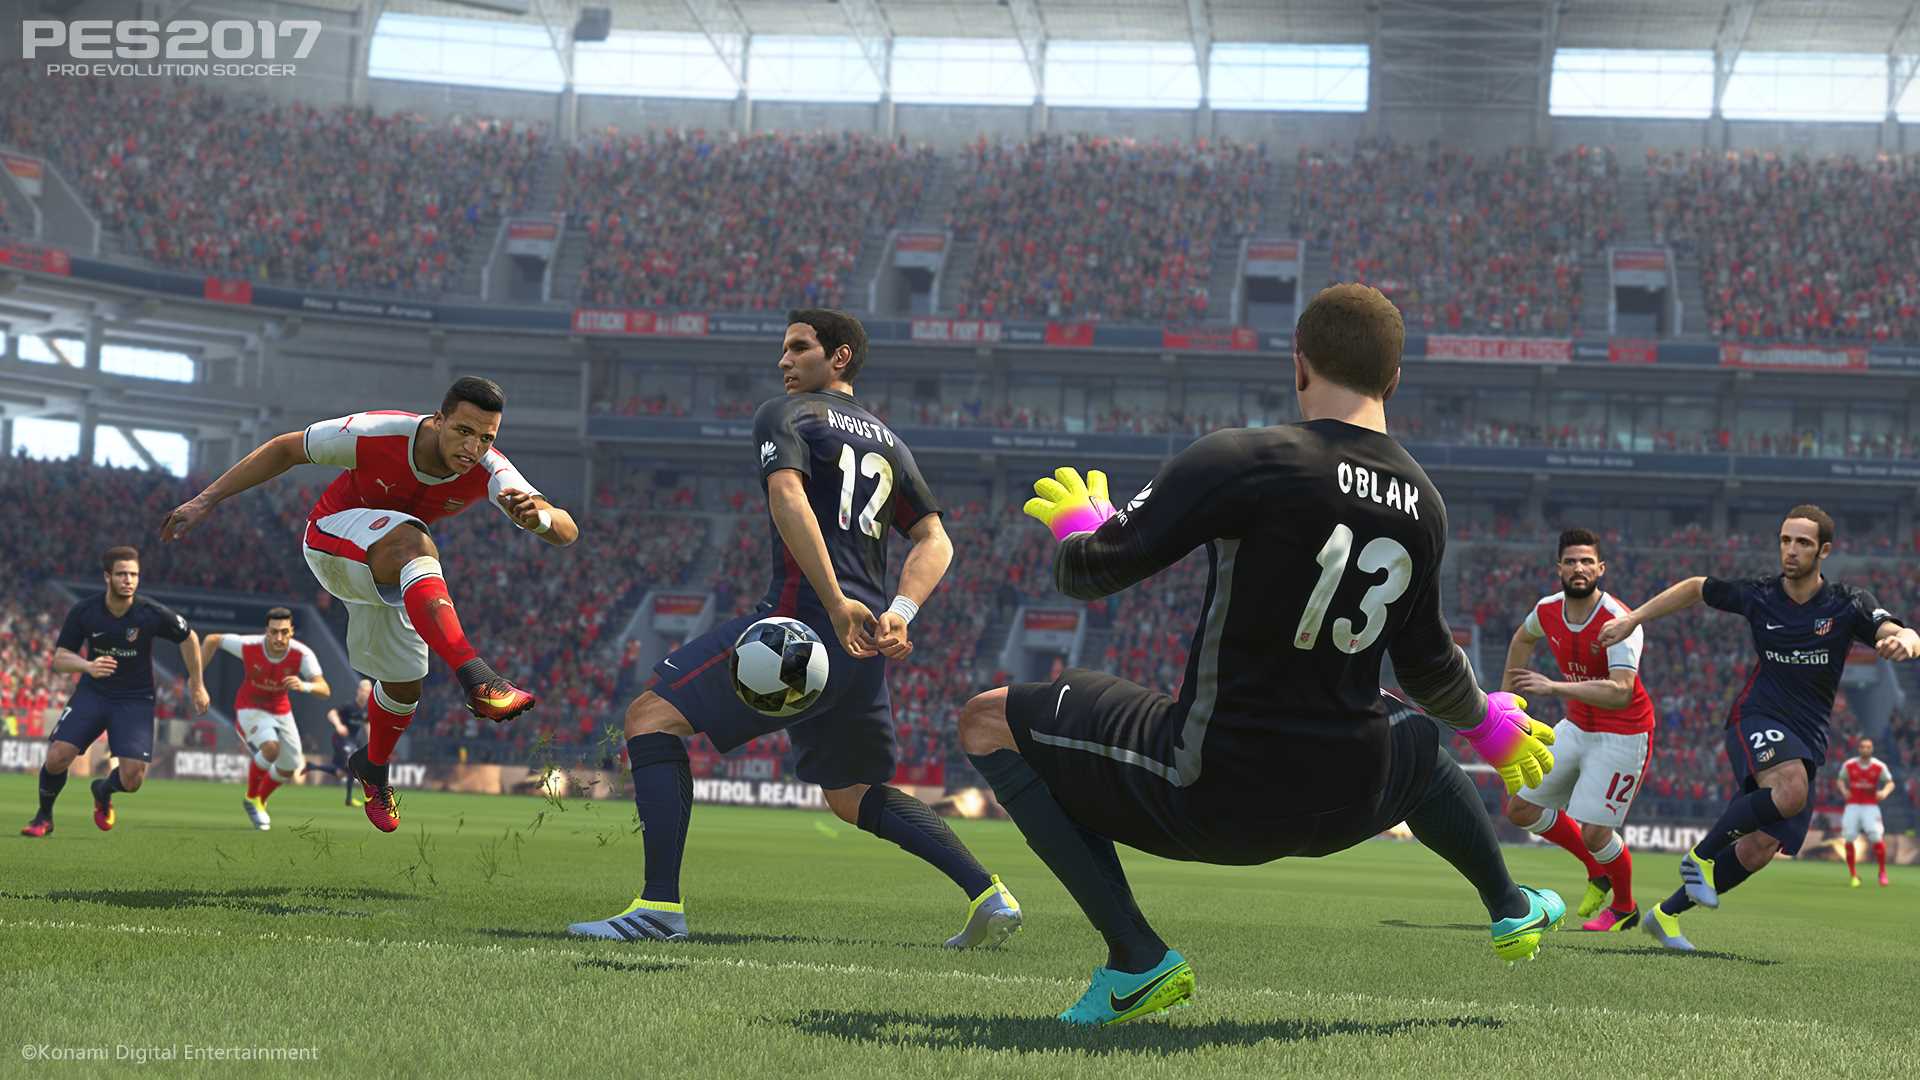 PES 2017 Seeks to Become the Most Realistic Soccer Game Ever - GameSpot